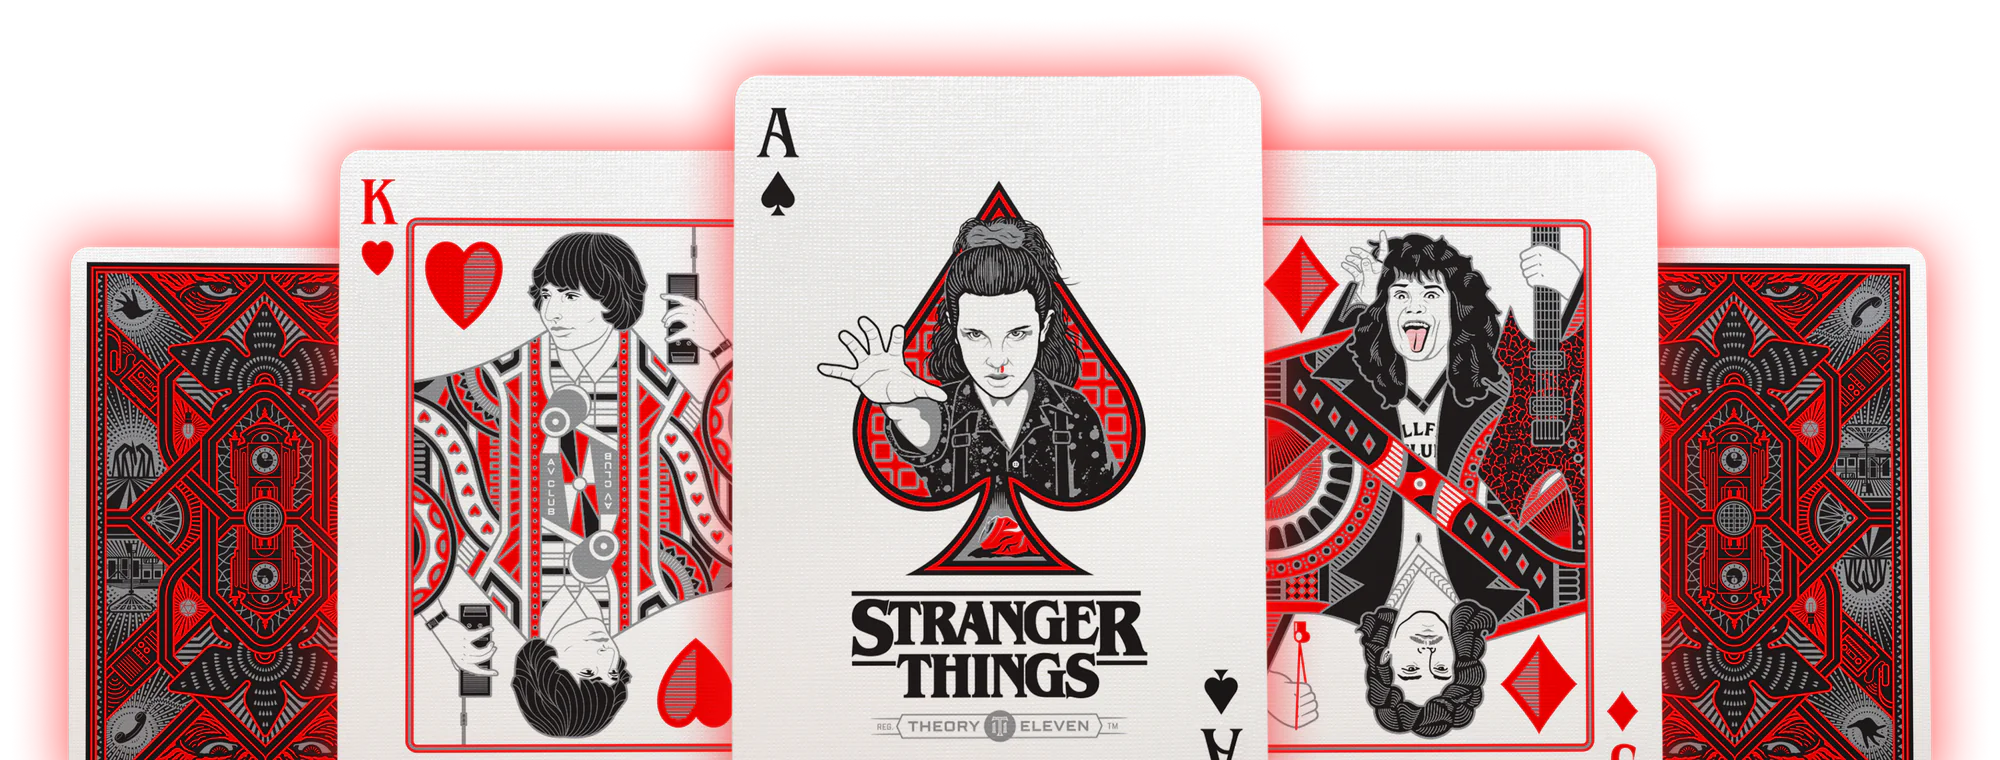 Bicycle Playing Cards: Theory 11 Stranger Things - Bards & Cards